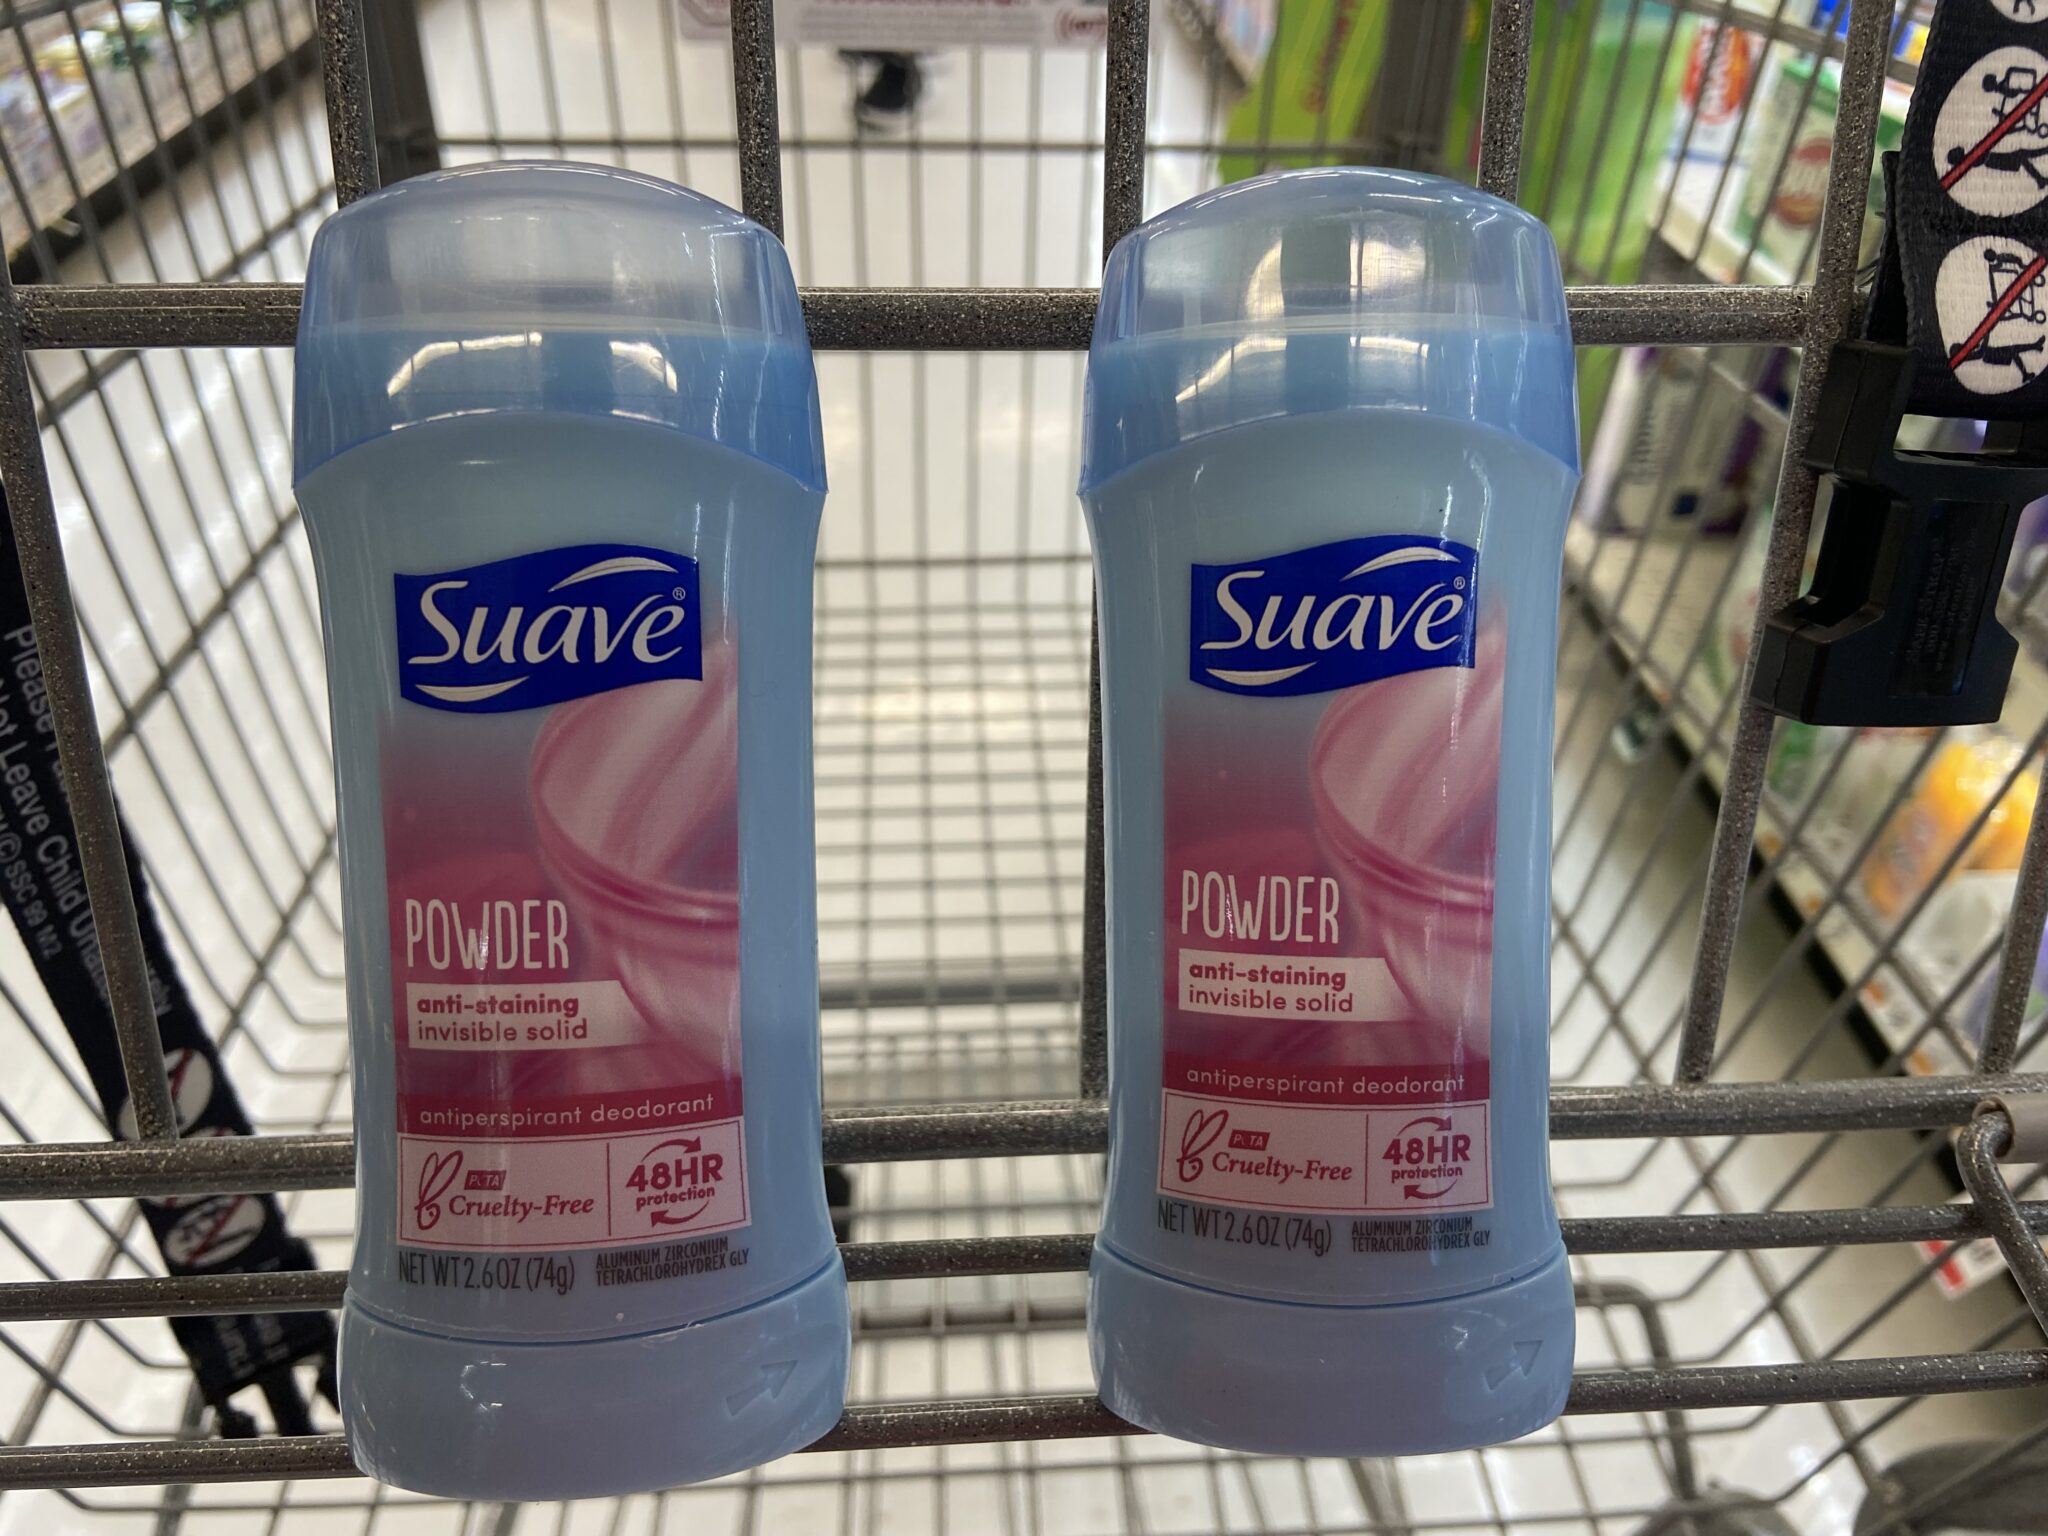 Giant: Suave Deodorant JUST $0.08 Each Thru 5/9 {New Coupon}